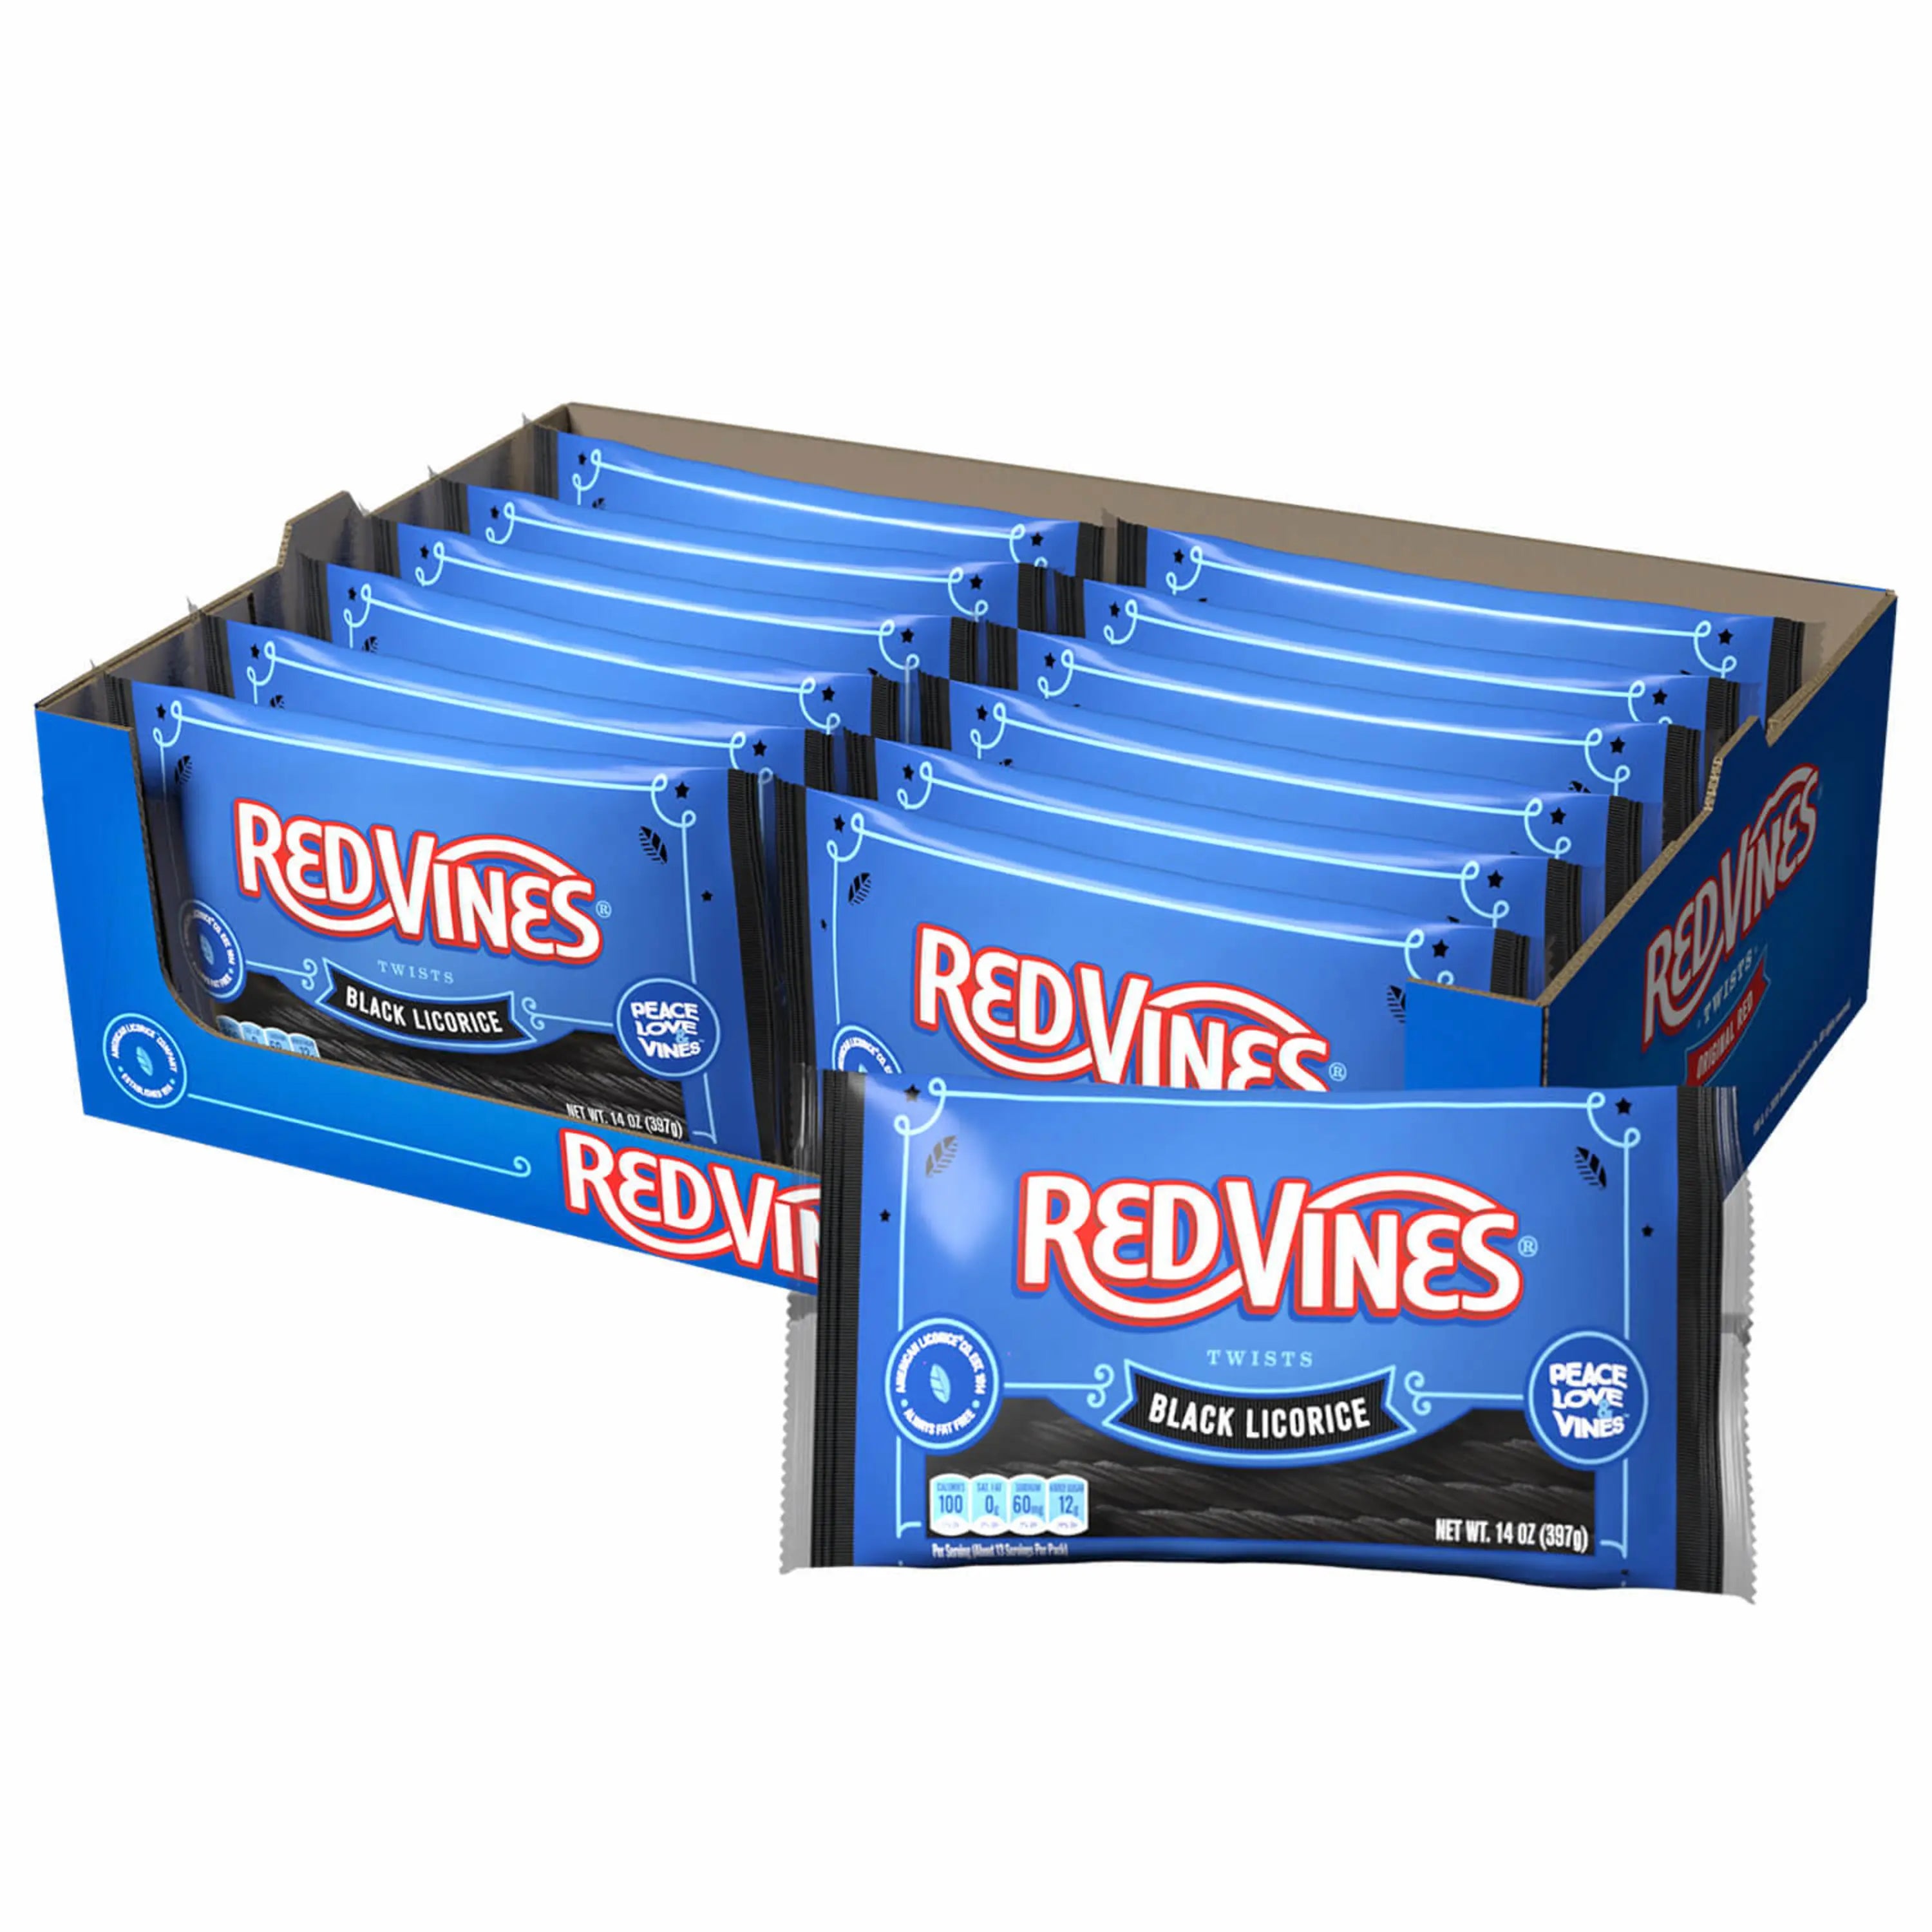 RED VINES Black Licorice Twists 12-pack of 14oz bags